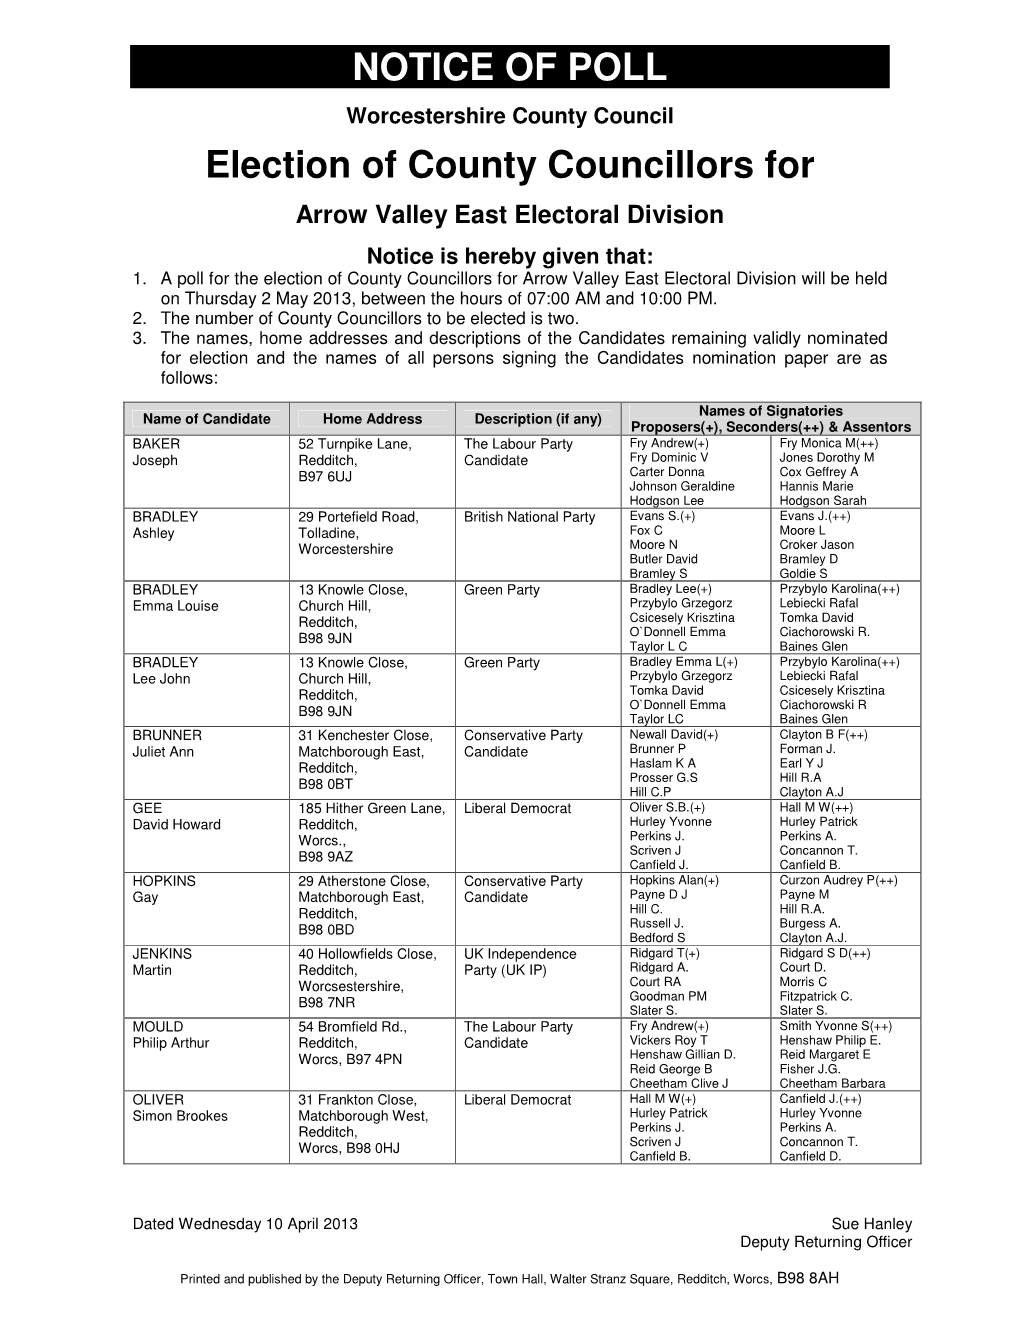 NOTICE of POLL Election of County Councillors